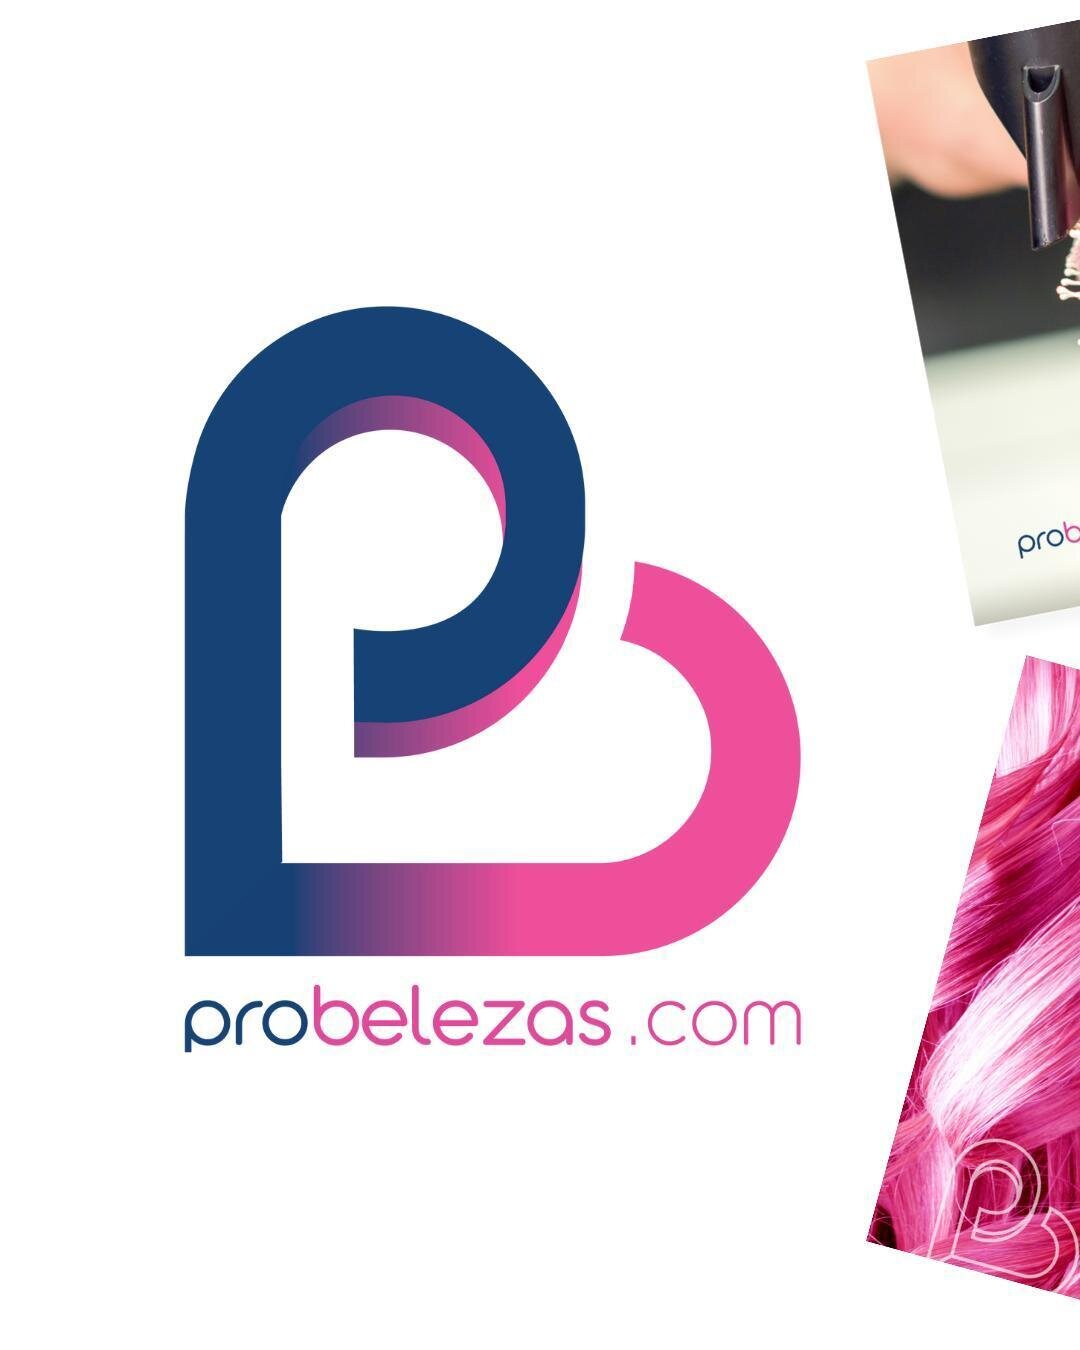 Meet ProBeleza, the most complete supply store for beauty professionals in Portugal.

We did their whole branding- from their logo to their tone of voice (and Web Store&hellip; just to mention it!)

We love helping businesses that help businesses.

I